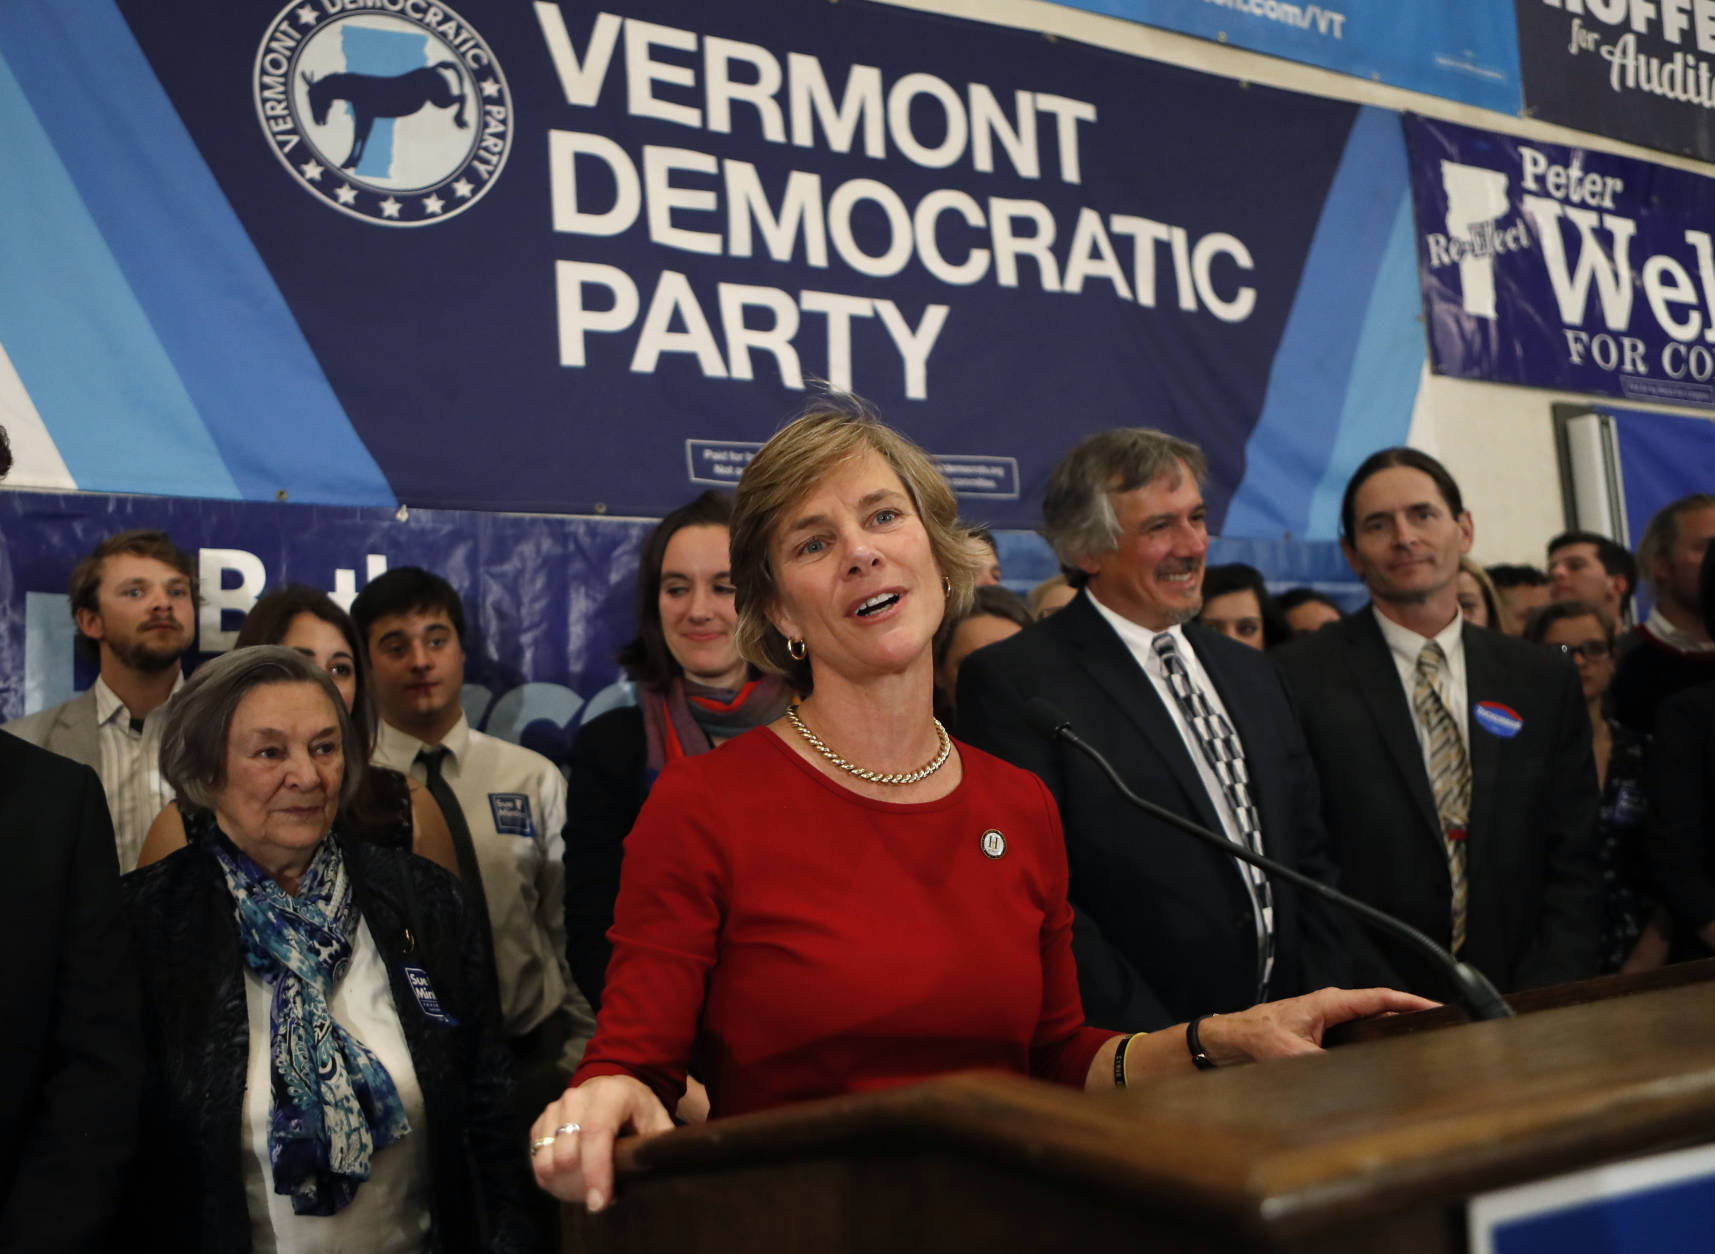 Democratic gubernatorial candidate Sue Minter speaks to supporters after conceding to Republican Phil Scott, Tuesday, Nov. 8, 2016, in Burlington, Vt. (AP Photo/Robert F. Bukaty)